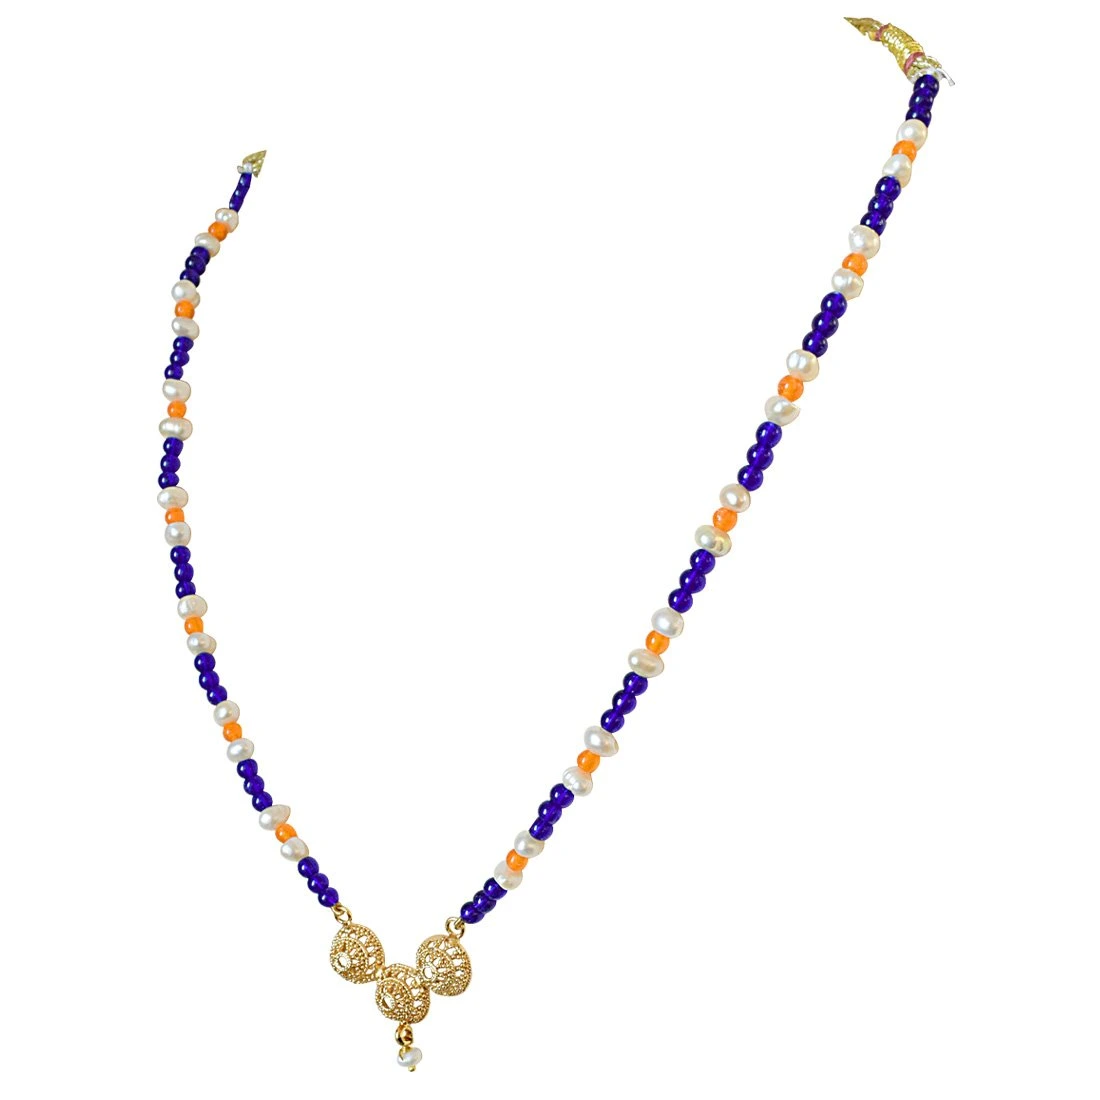 Traditional Gold Plated Vati Pendant, Blue and Orange Colored Stone and Freshwater Pearl Necklace for Women (SN592)